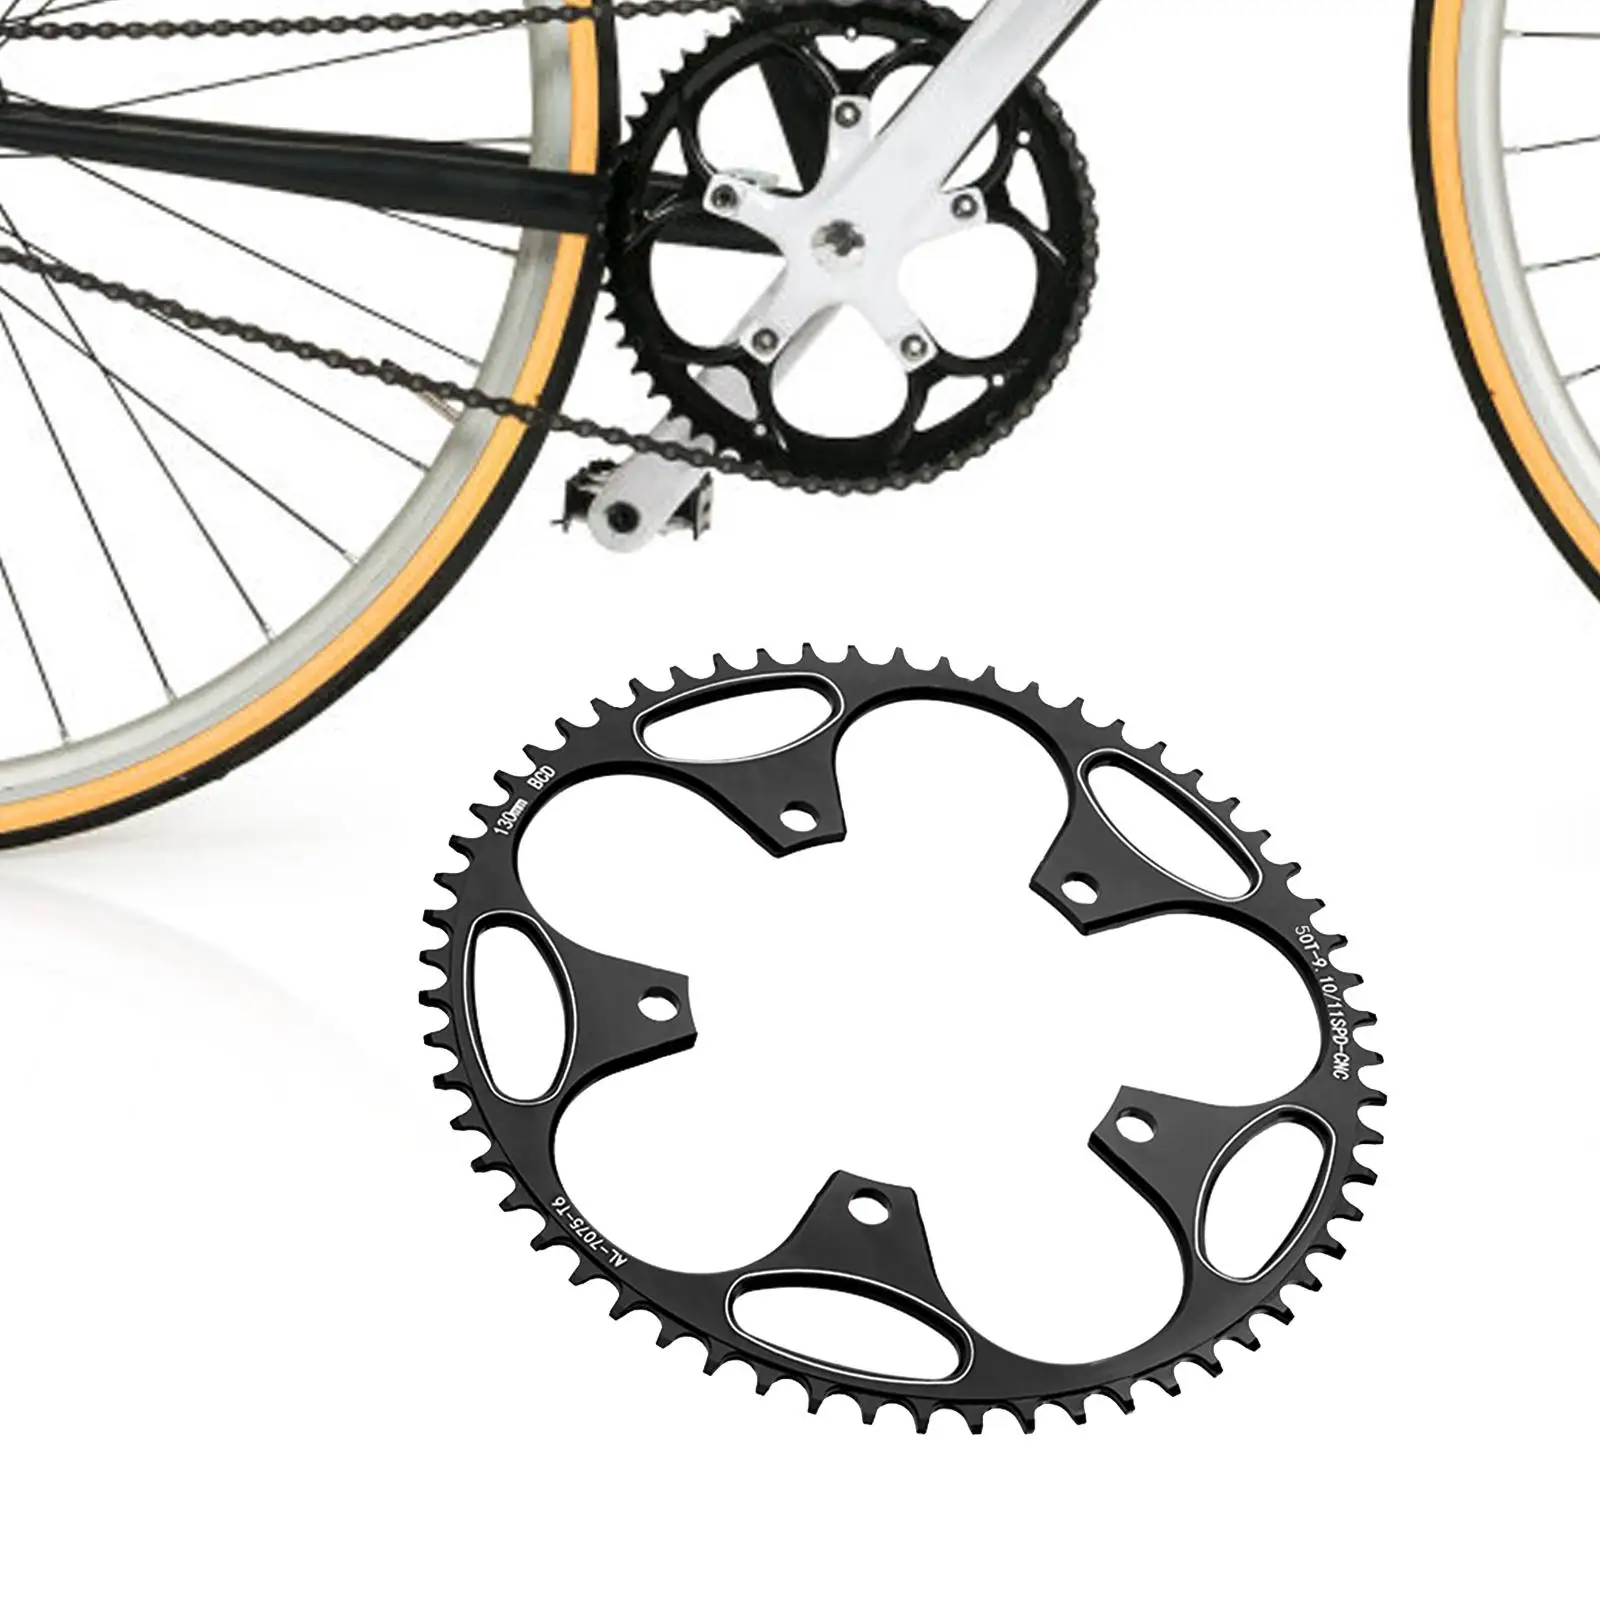 130BCD Sprocket Chainwheel Aluminum Crankset Replace Easy Installation Chain Accessories Bike Narrow Wide Chainring for